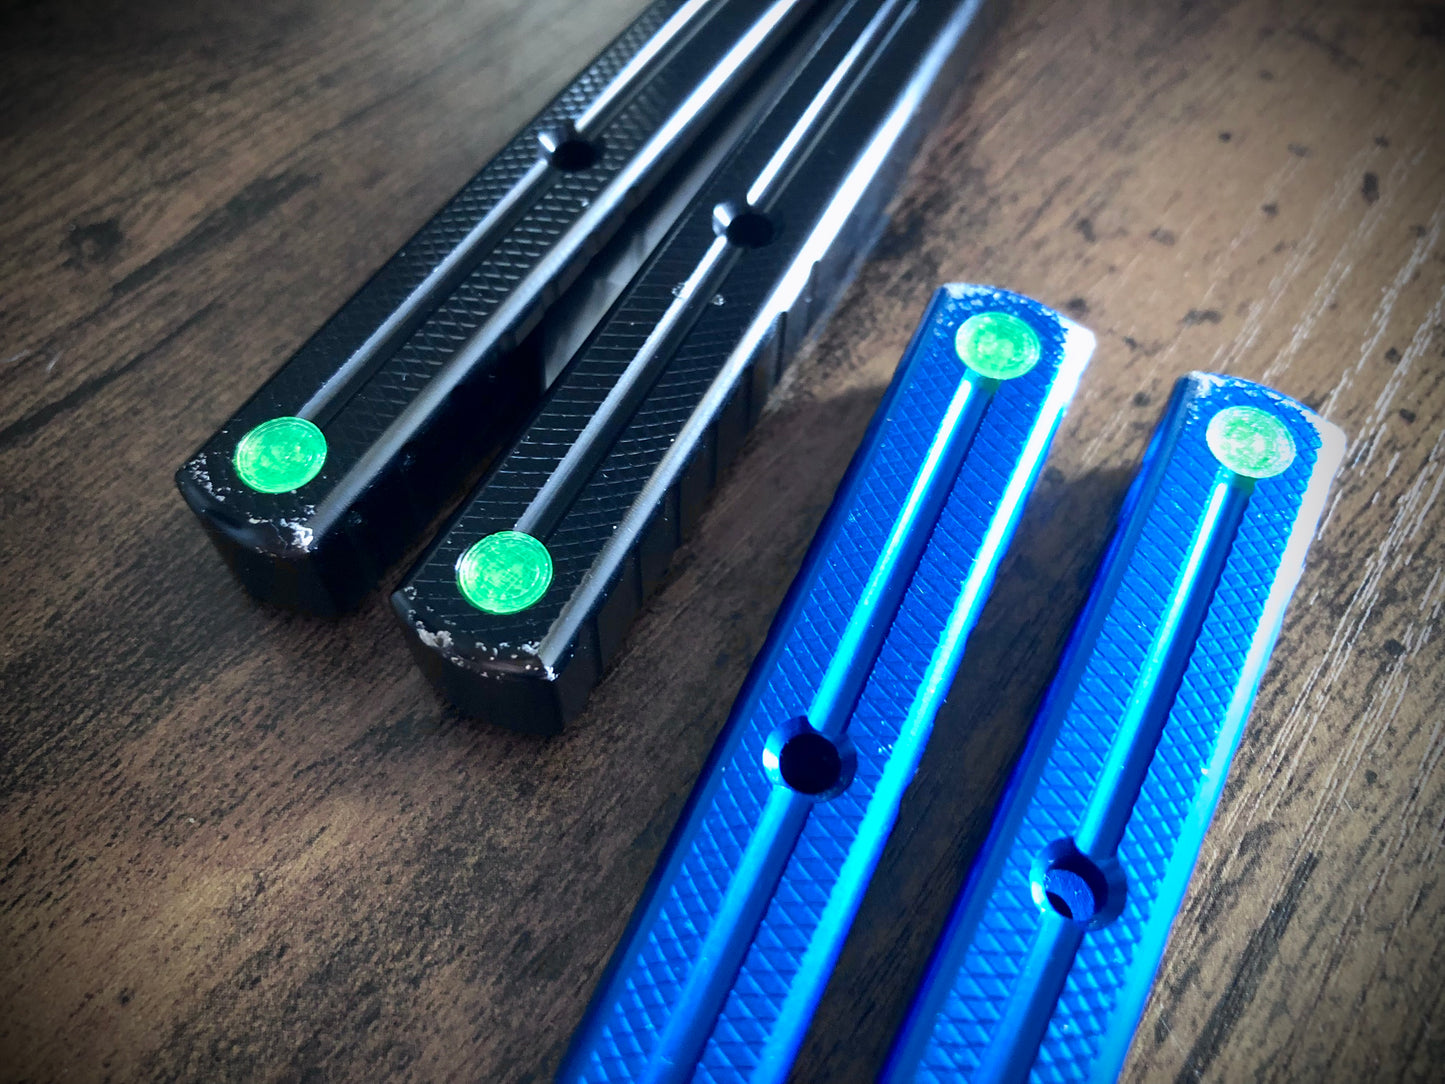 Pivot Plugs are a cosmetic handle inlay mod designed to friction fit in 3/16" bores at the bottom of a variety of balisong handles, including the Squid Industries Krake Raken balisong, the MachineWise Prysma, and the Nabalis Vulp Pro.